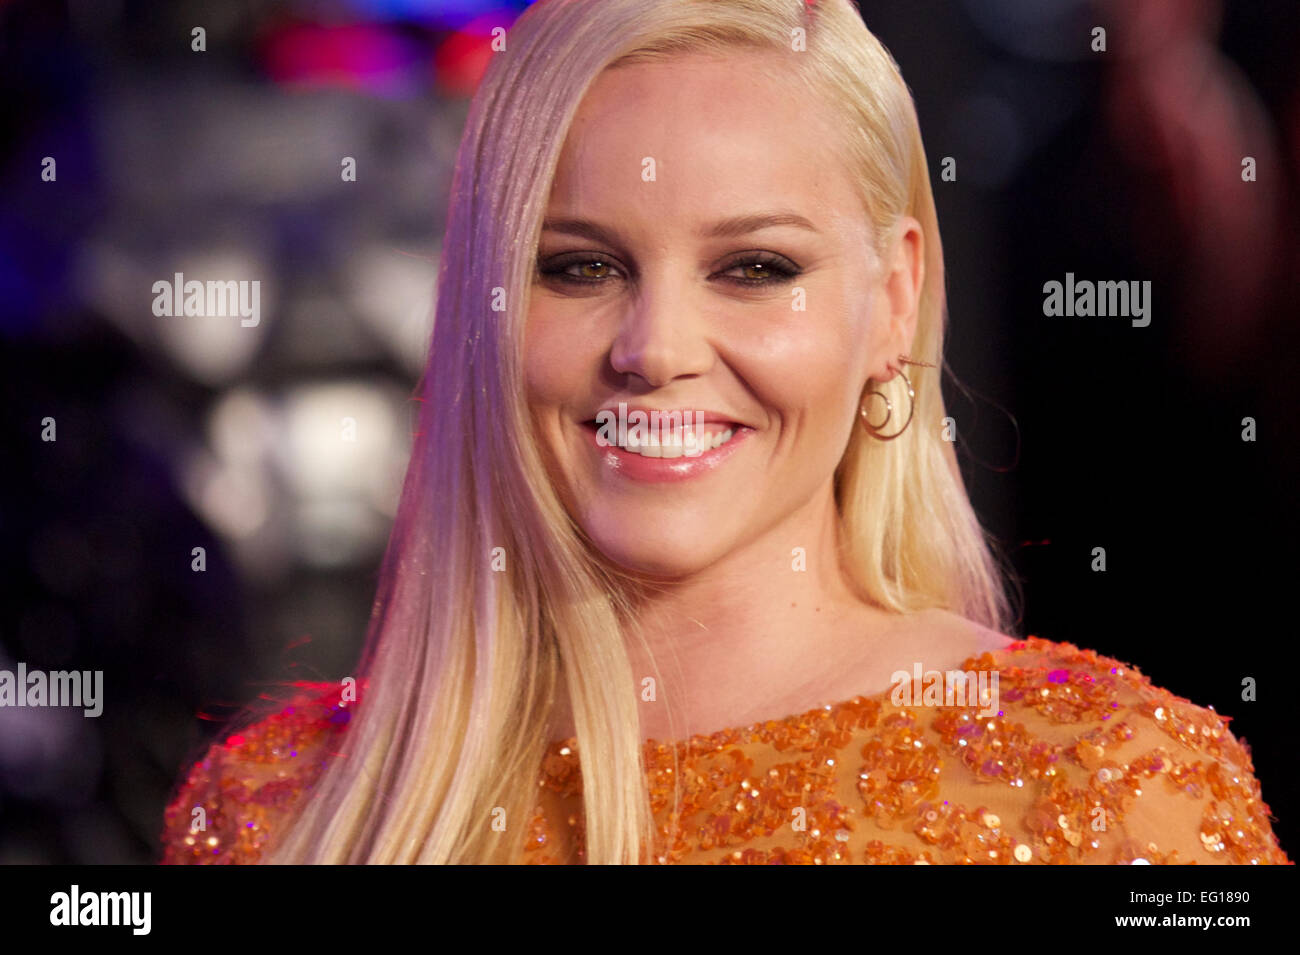 UNITED KINGDOM: Australian actress Abbie Cornish poses for pictures on the red carpet as she arrives for the world premier of 'Robocop' in central London on February 5, 2014. Stock Photo